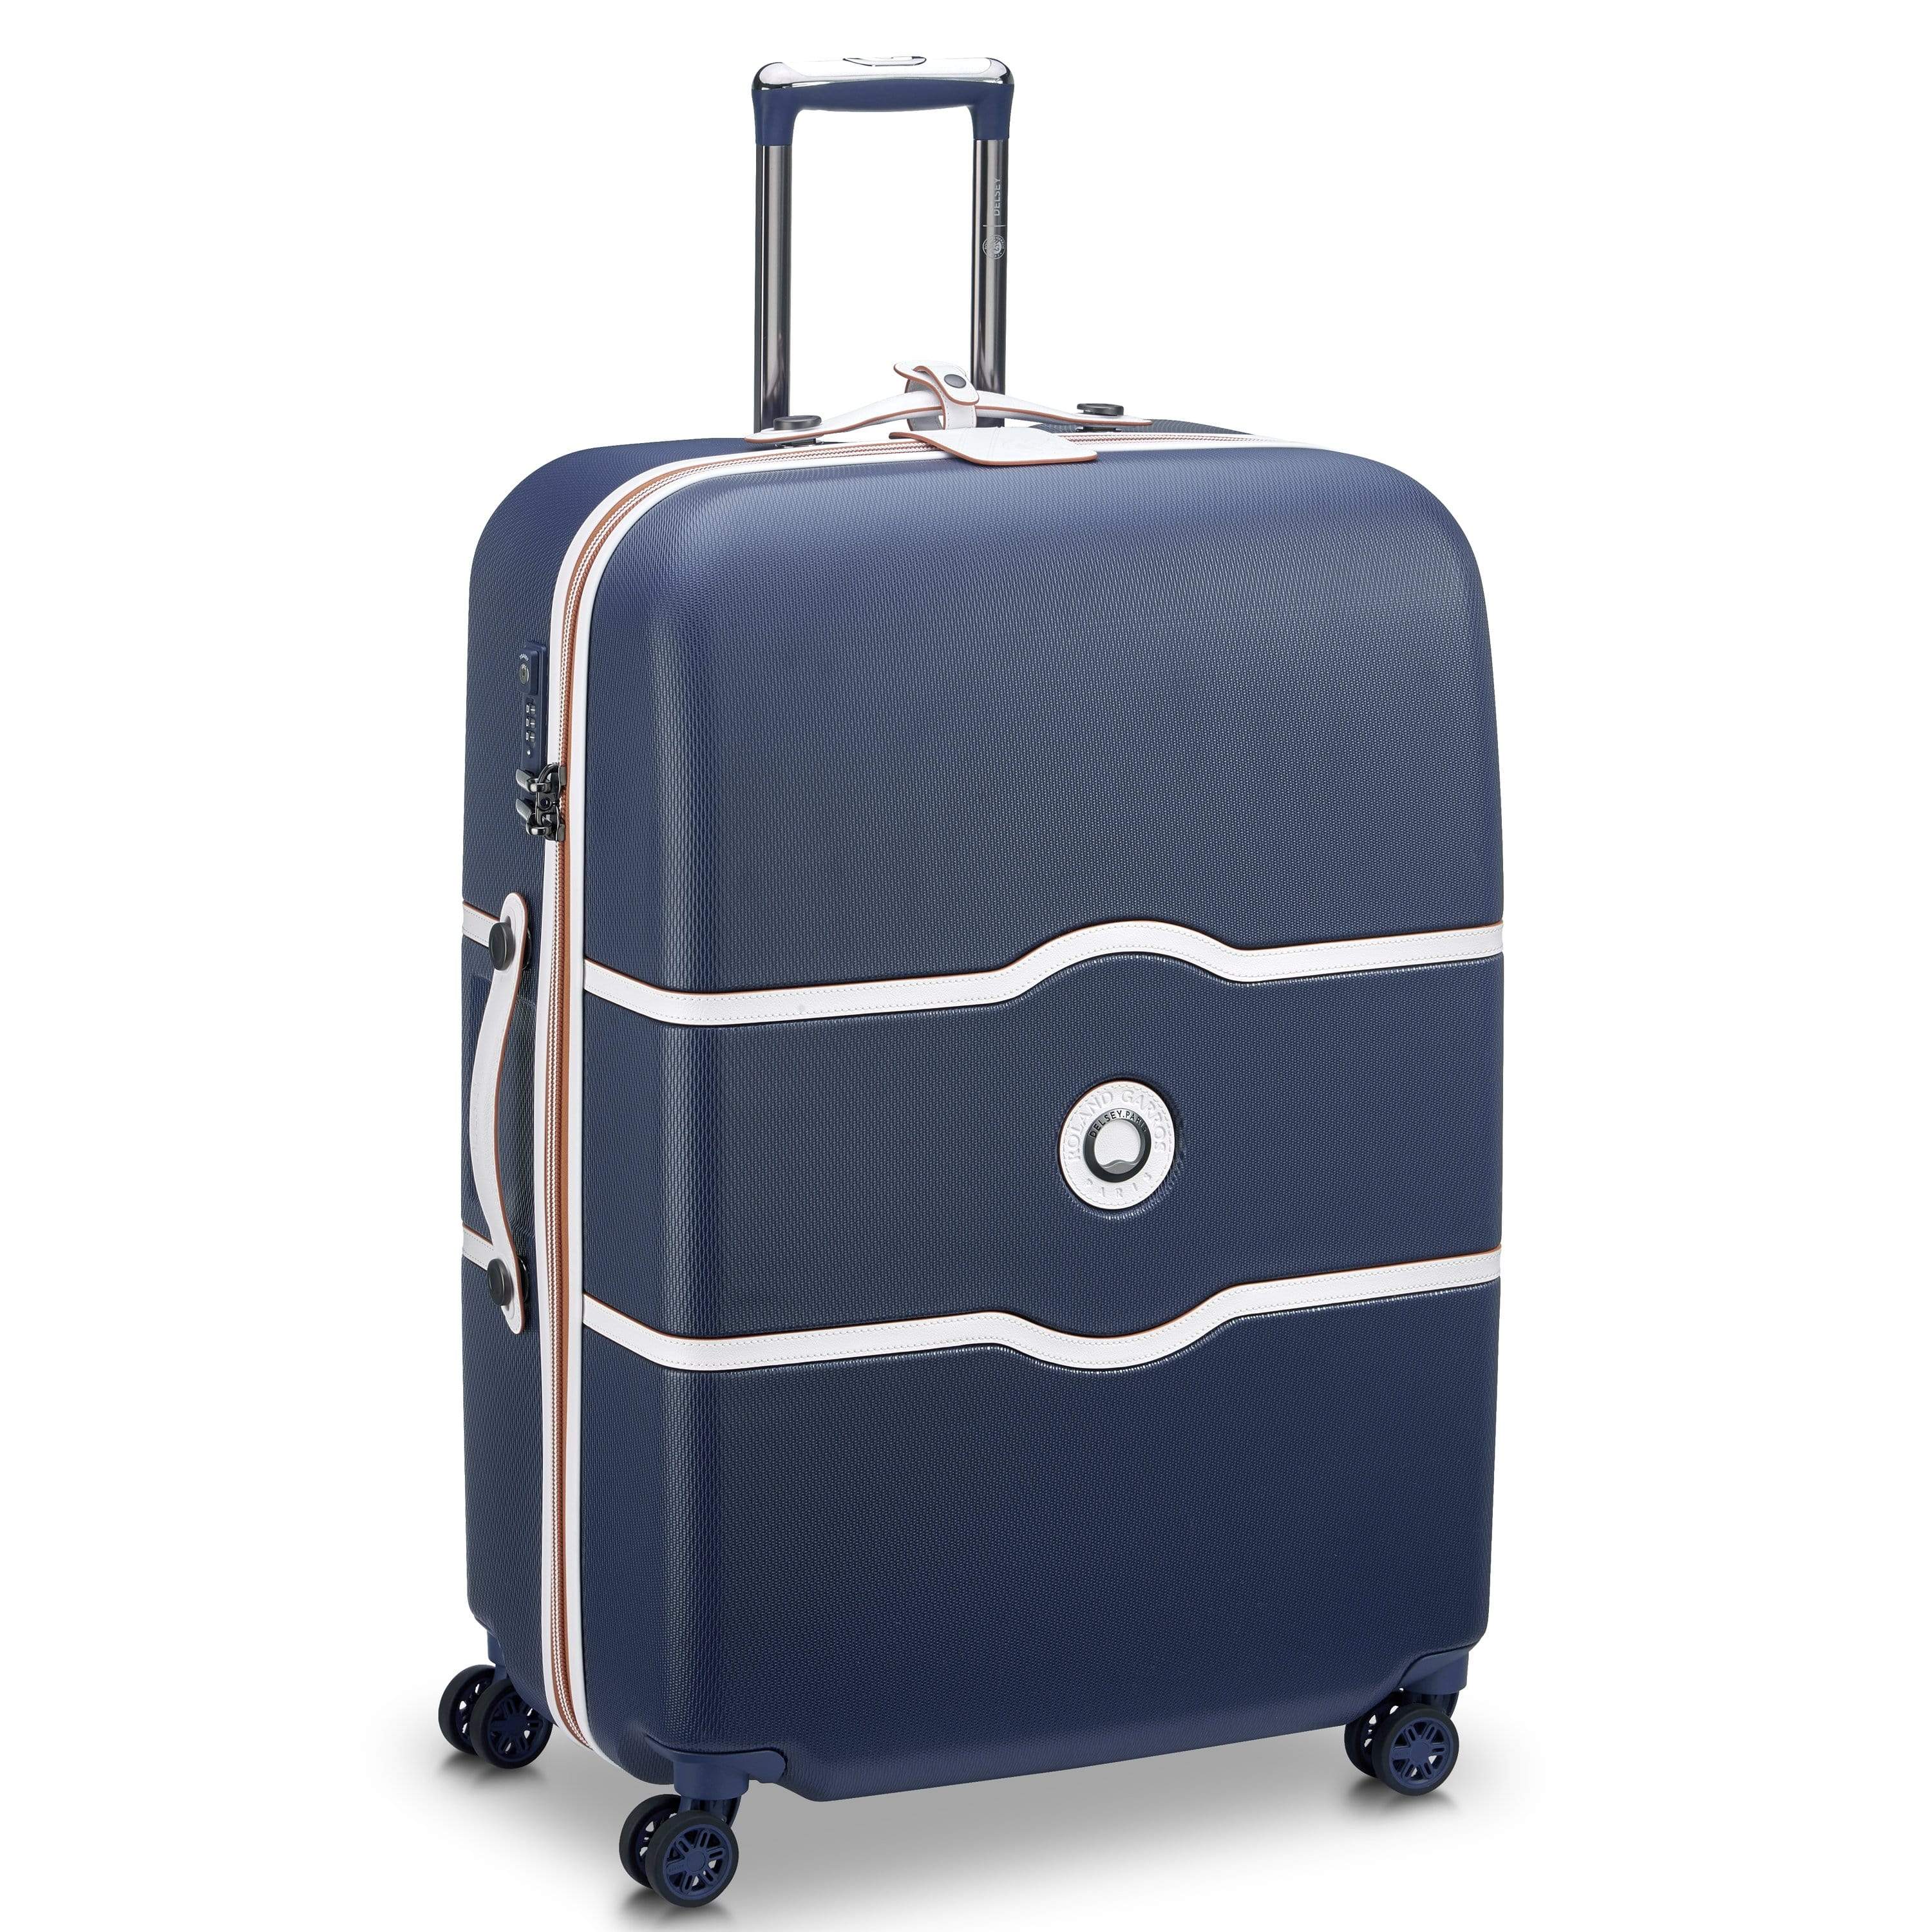 DELSEY CHATELET AIR 77 4DW TR CASE NAVY RG 00167282802 NAVY